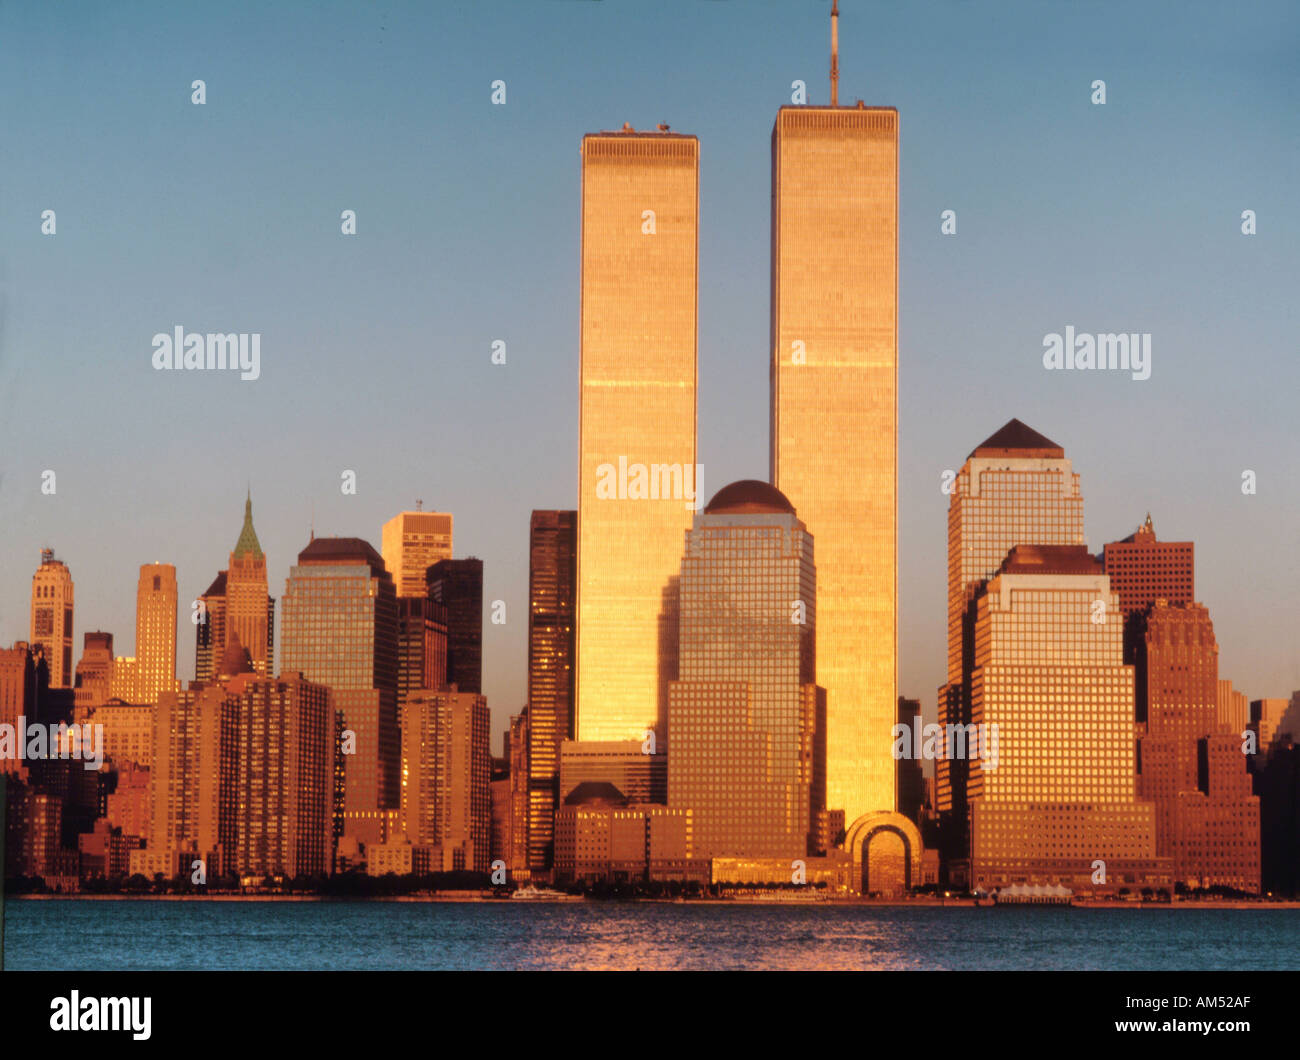 New York s Twin Towers pre 9/11 looking golden at sunset Stock Photo